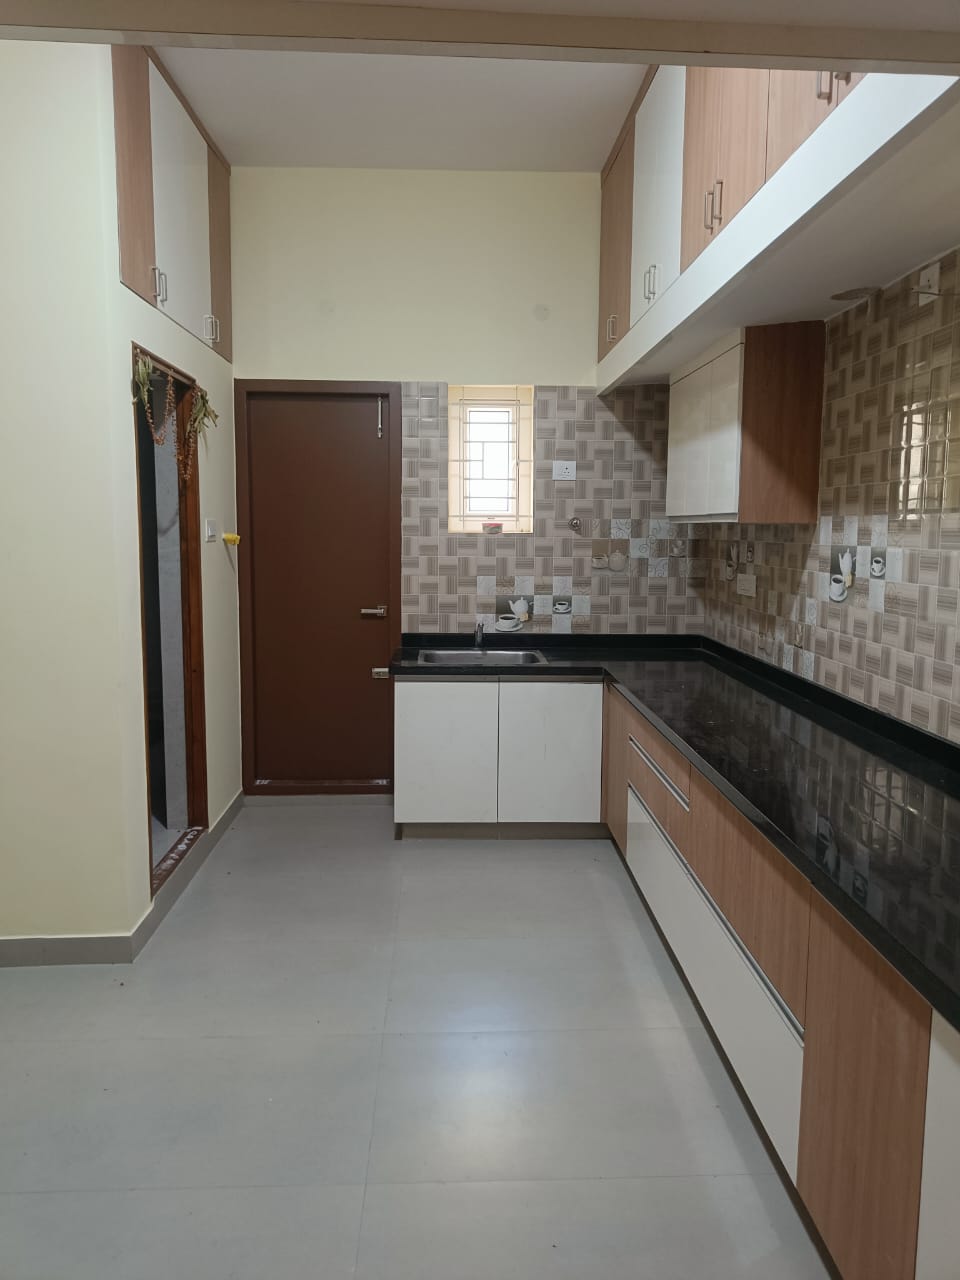 3 BHK Independent House for Lease Only at JAML2 - 4293 in Uttarahalli